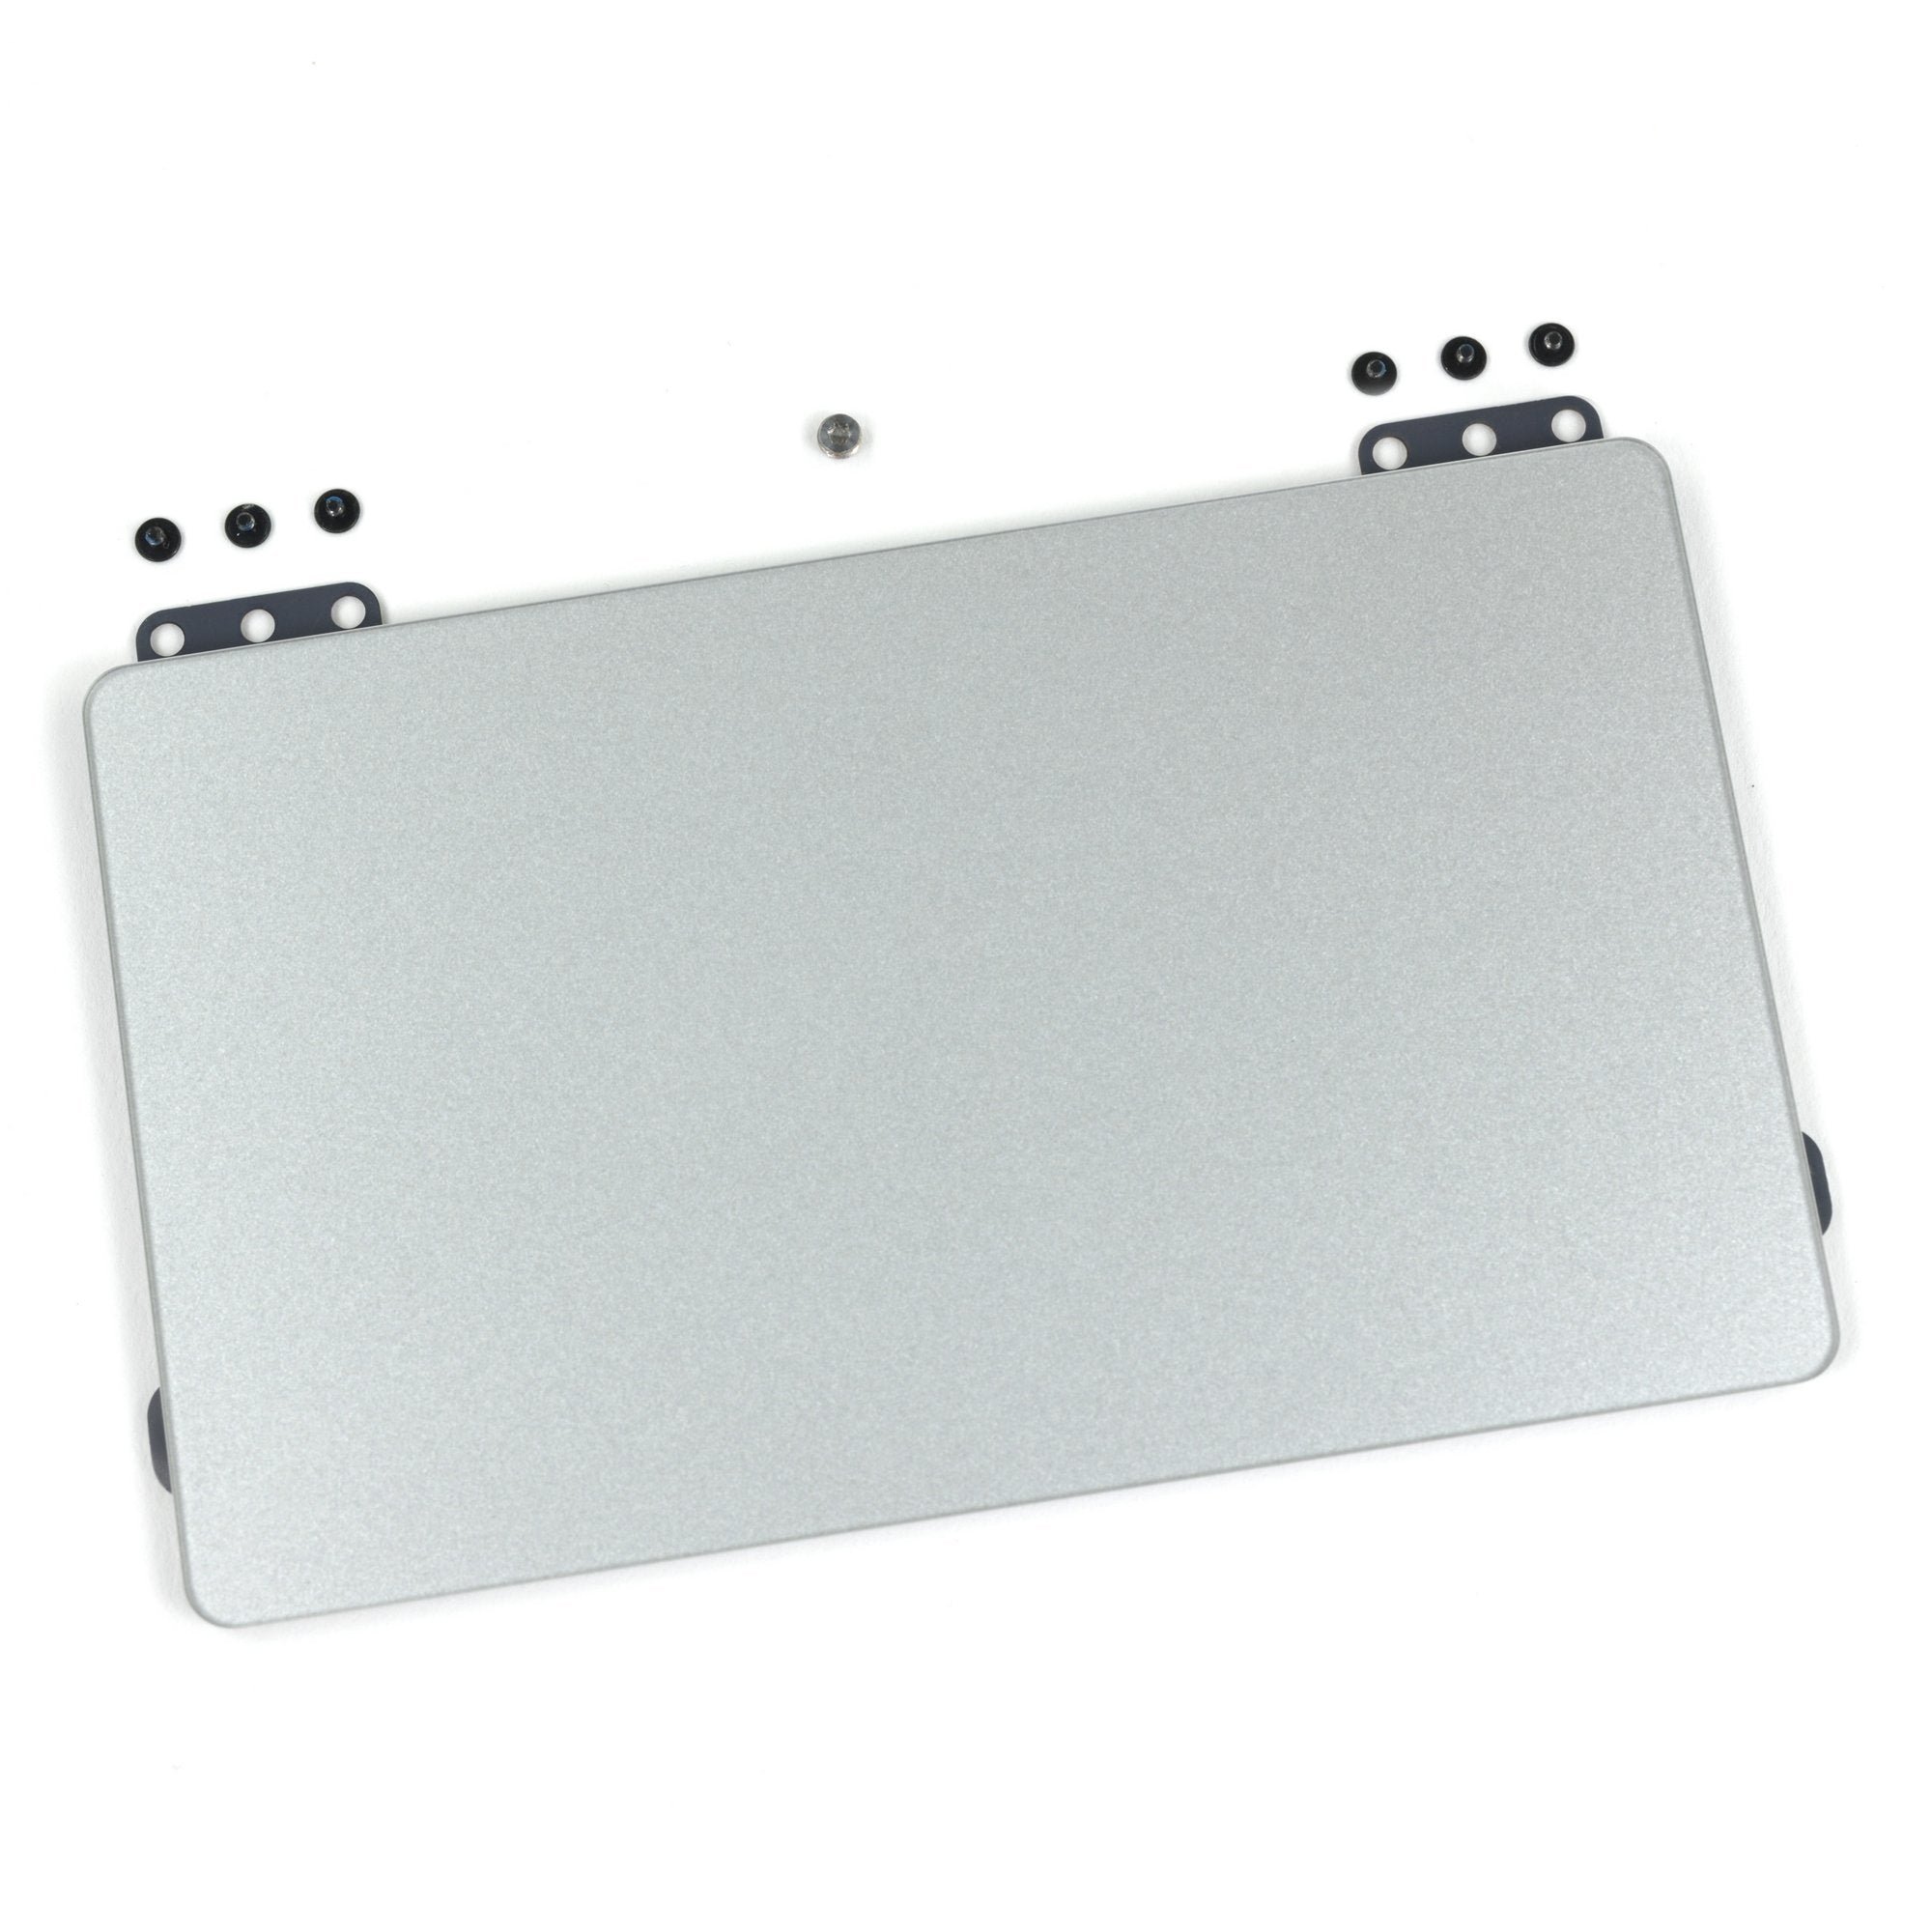 MacBook Air 11" (Mid 2013-Early 2015) Trackpad Used With Screws